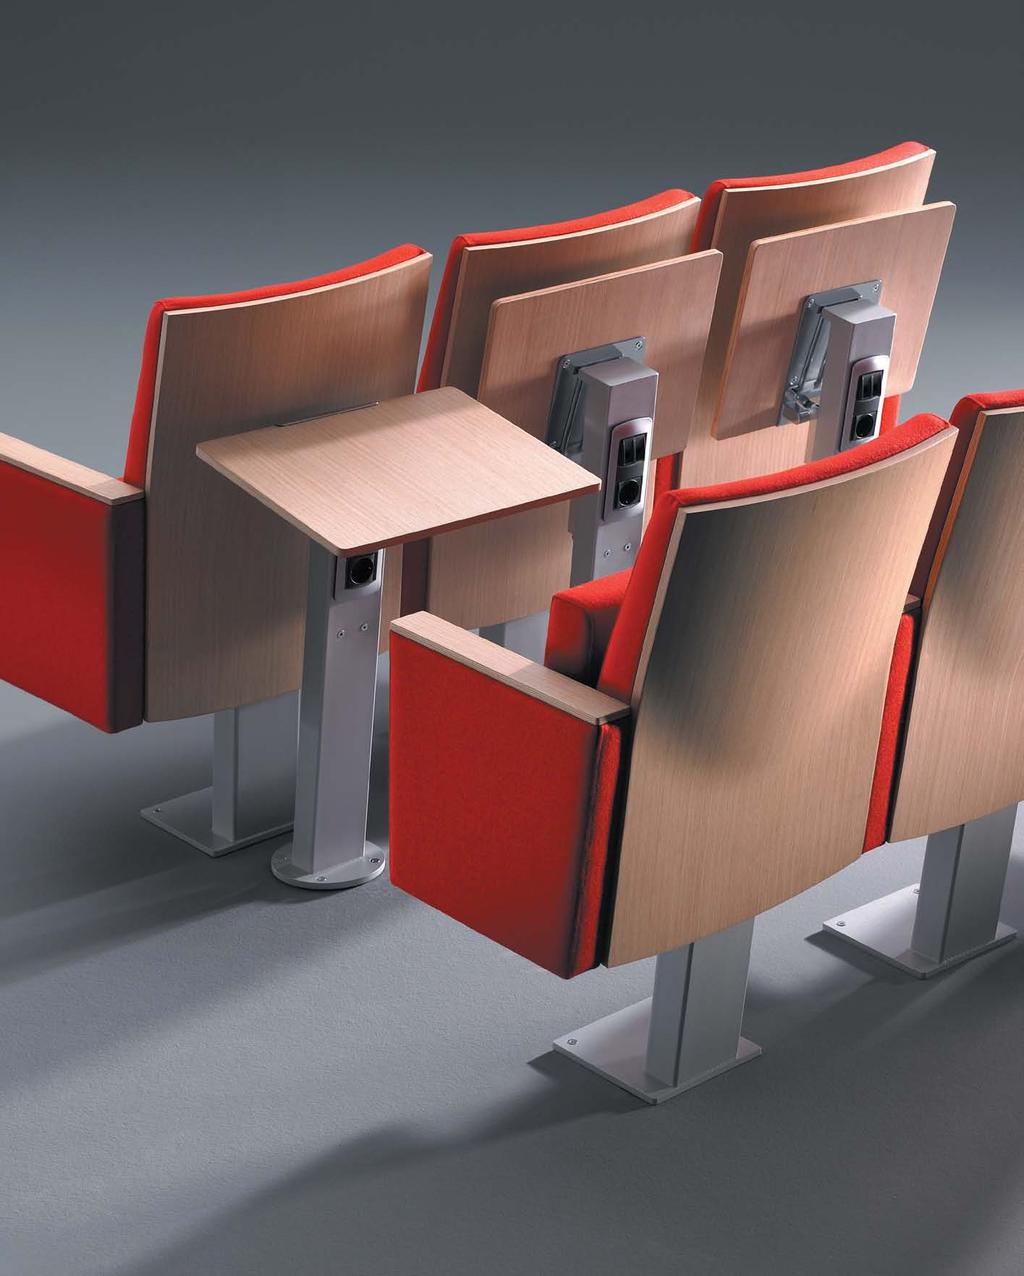 The adaptability of the Teatro easy chair makes it a good choice in theatres, auditoriums, conference centres, lecture halls, press or